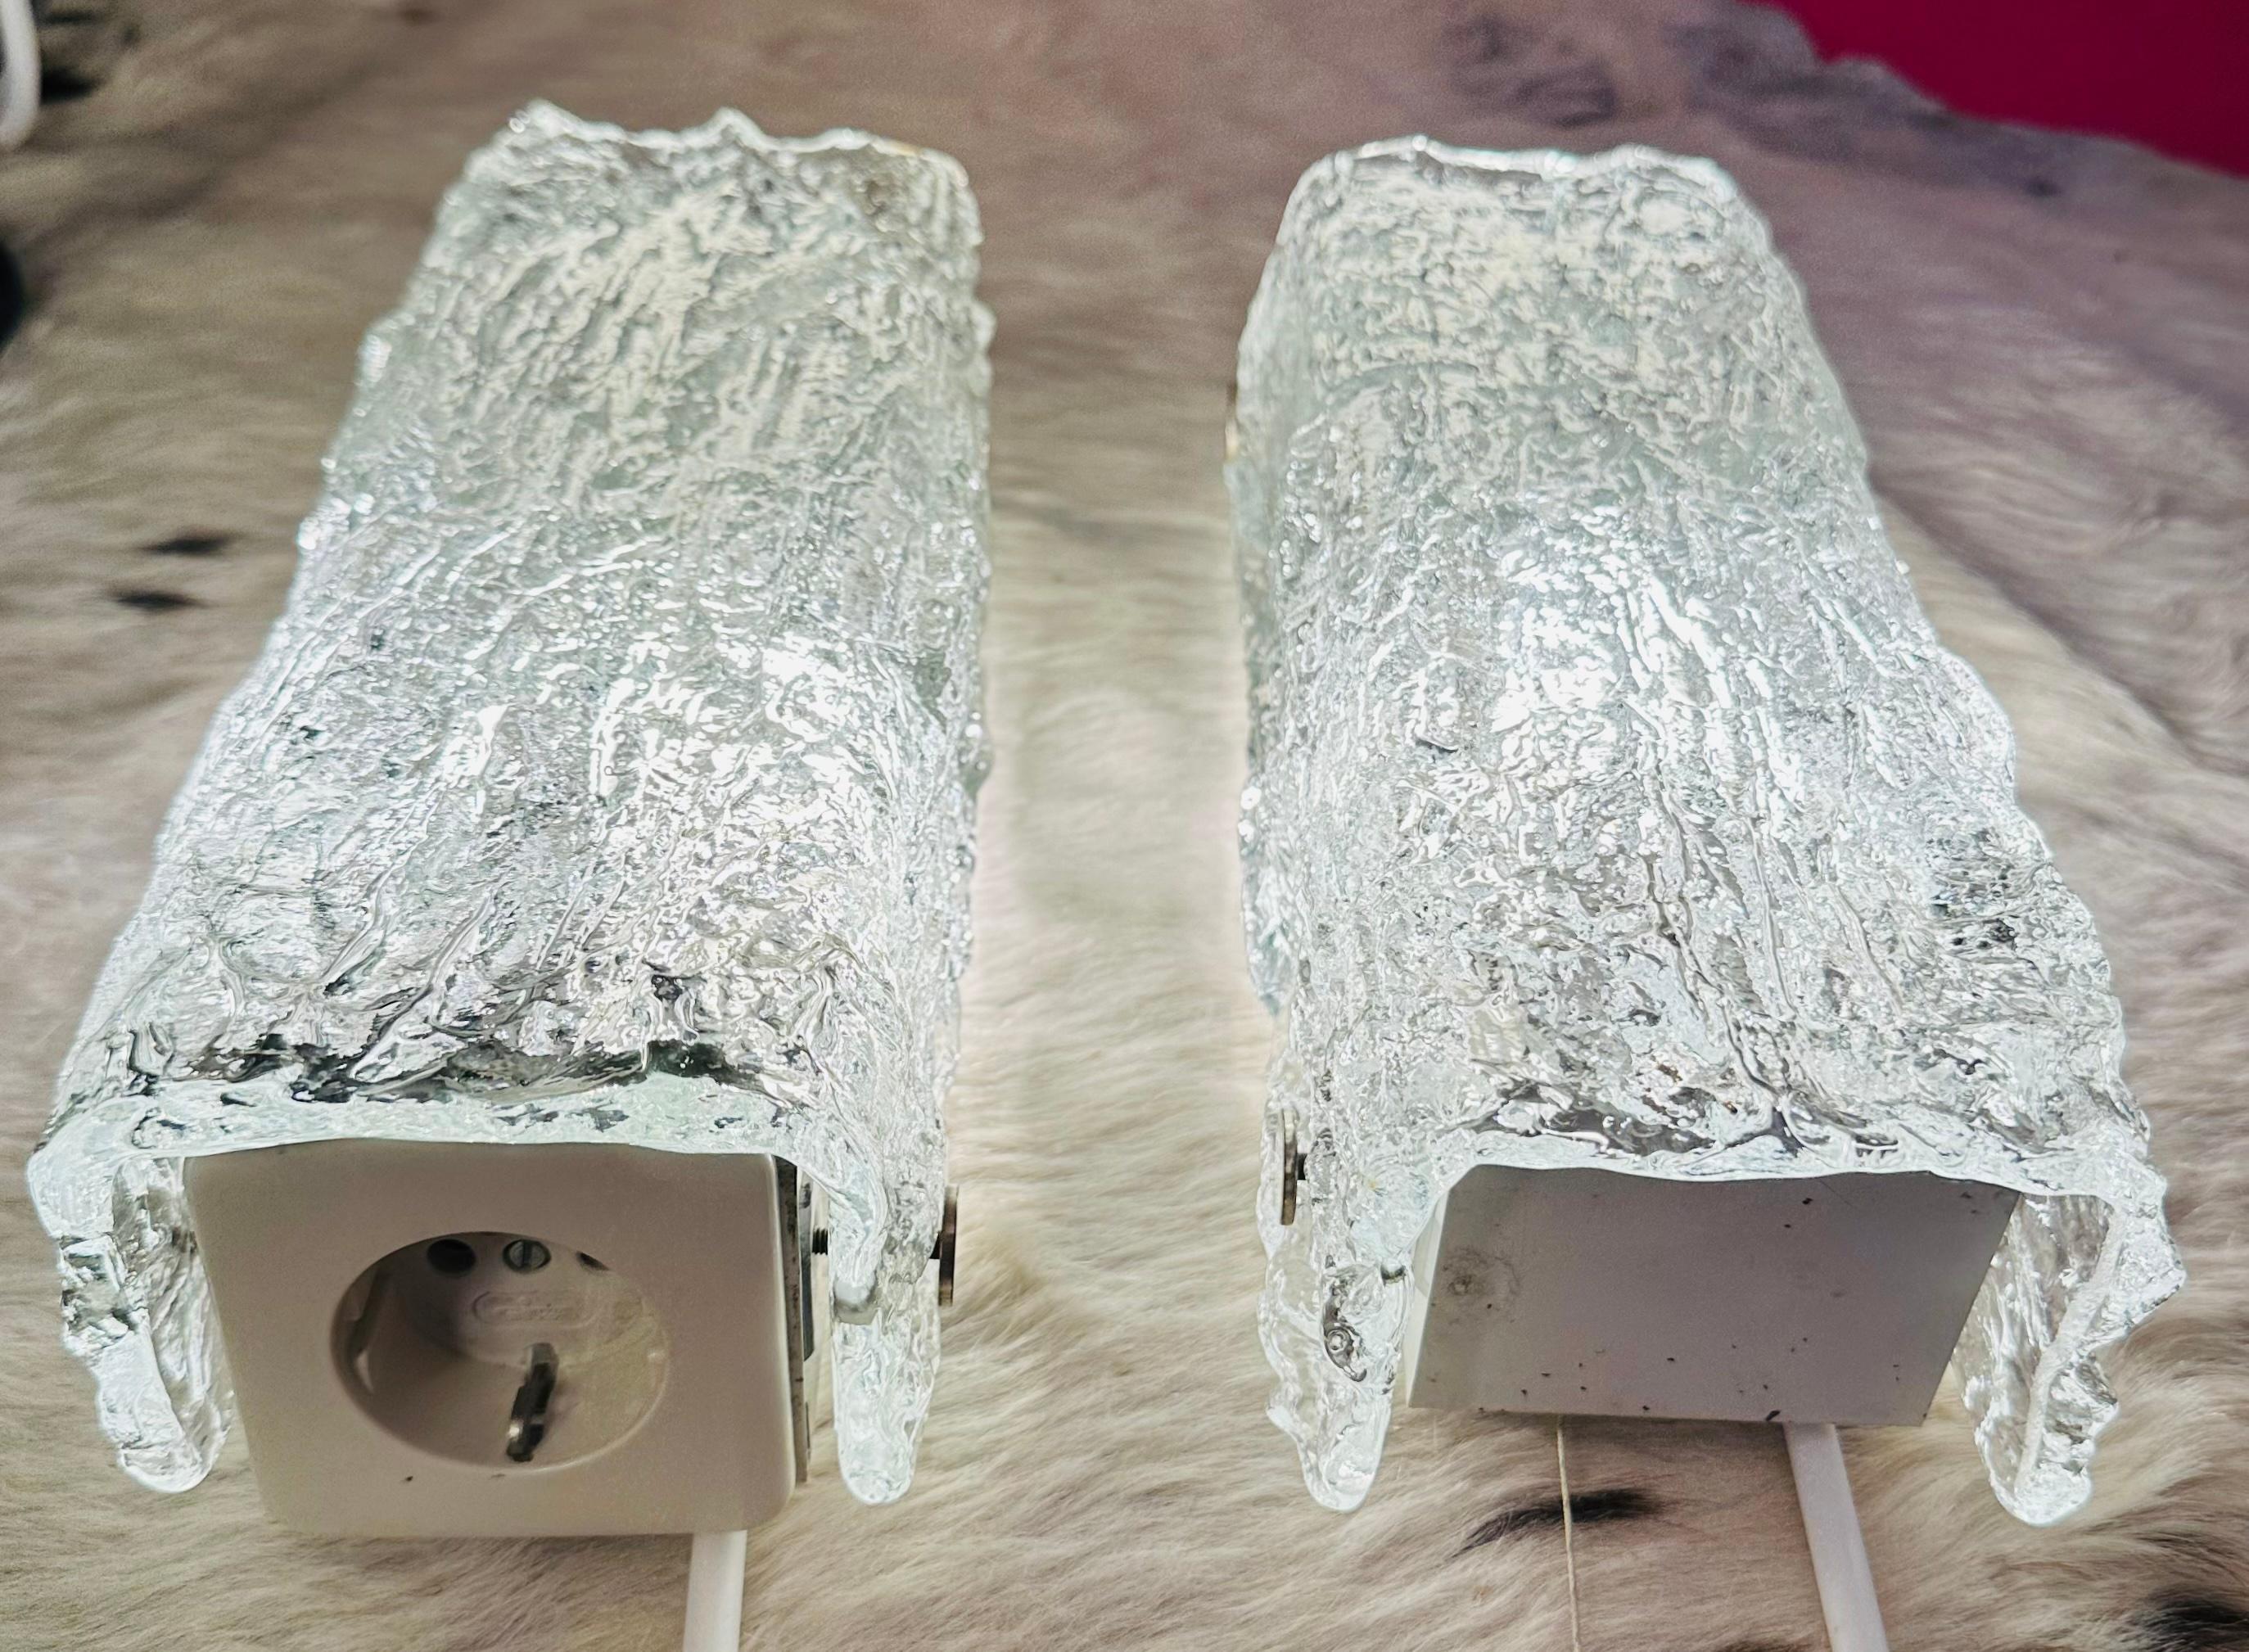 Pair of Small 1970s German Kaiser Leuchten Iced Textured Glass Wall Lights In Good Condition For Sale In London, GB